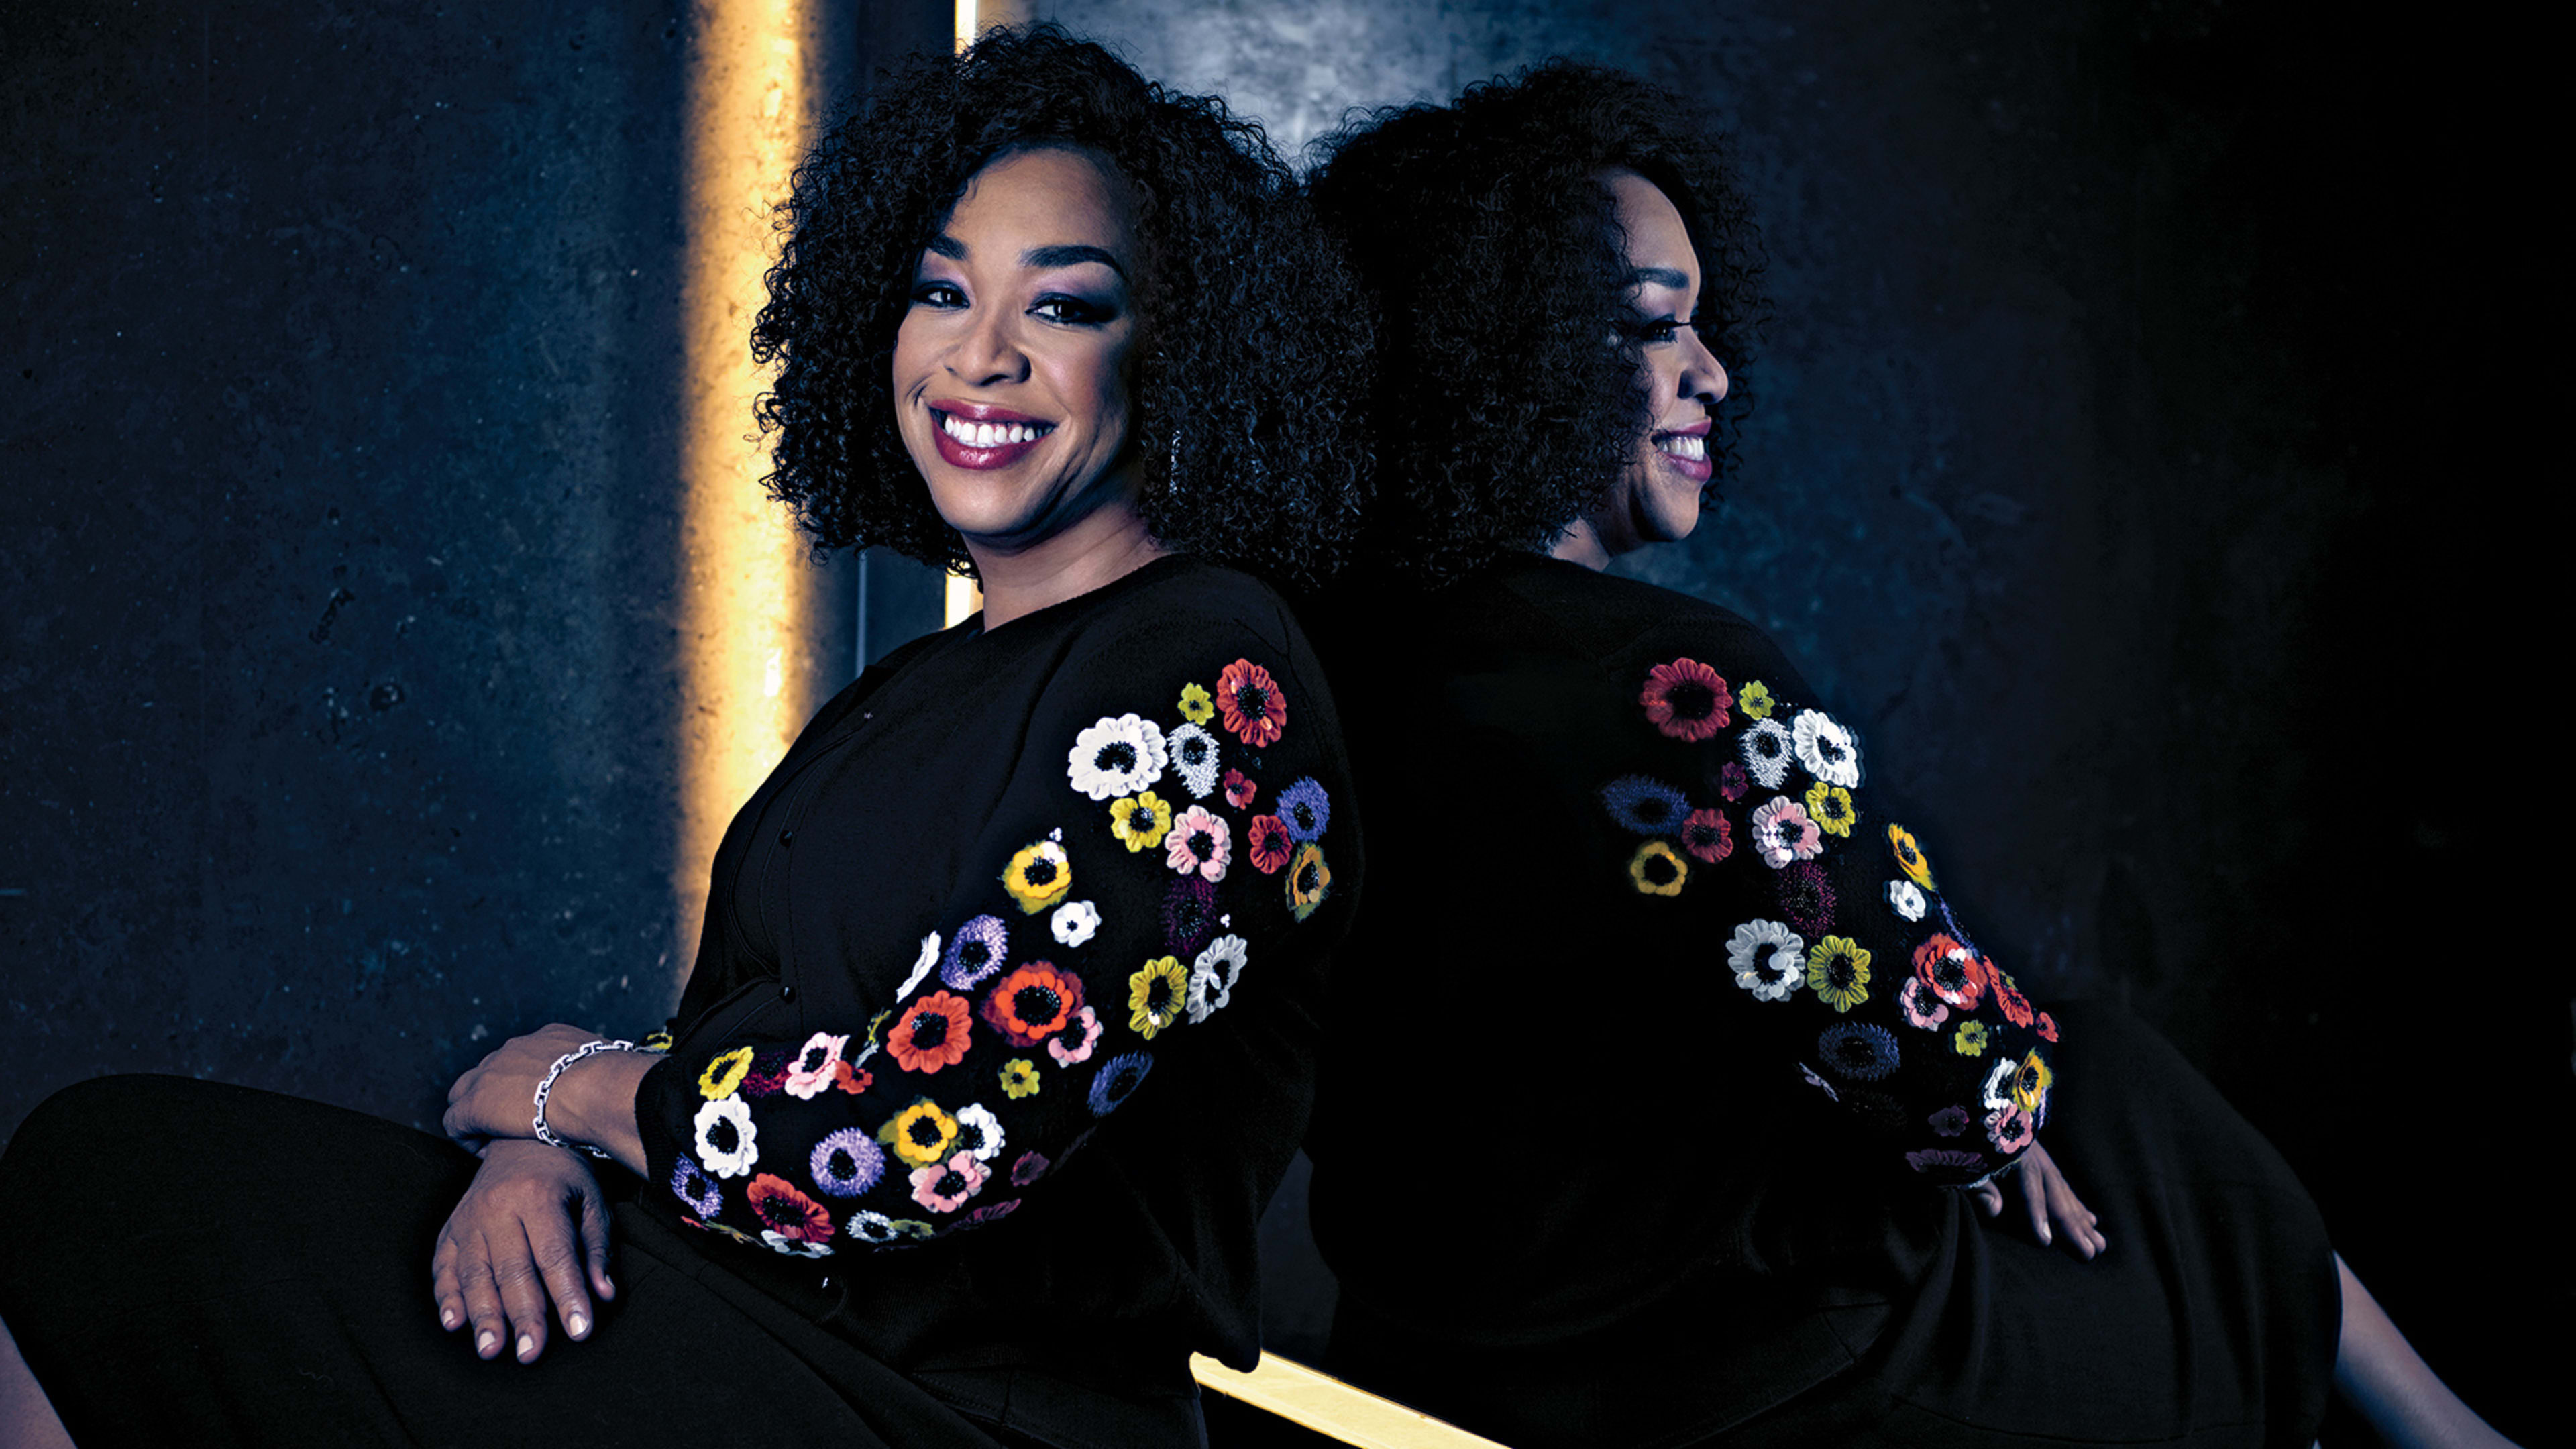 Shonda Rhimes' Rules Of Work: "Come Into My Office With A Solution, Not A  Problem" - Fast Company